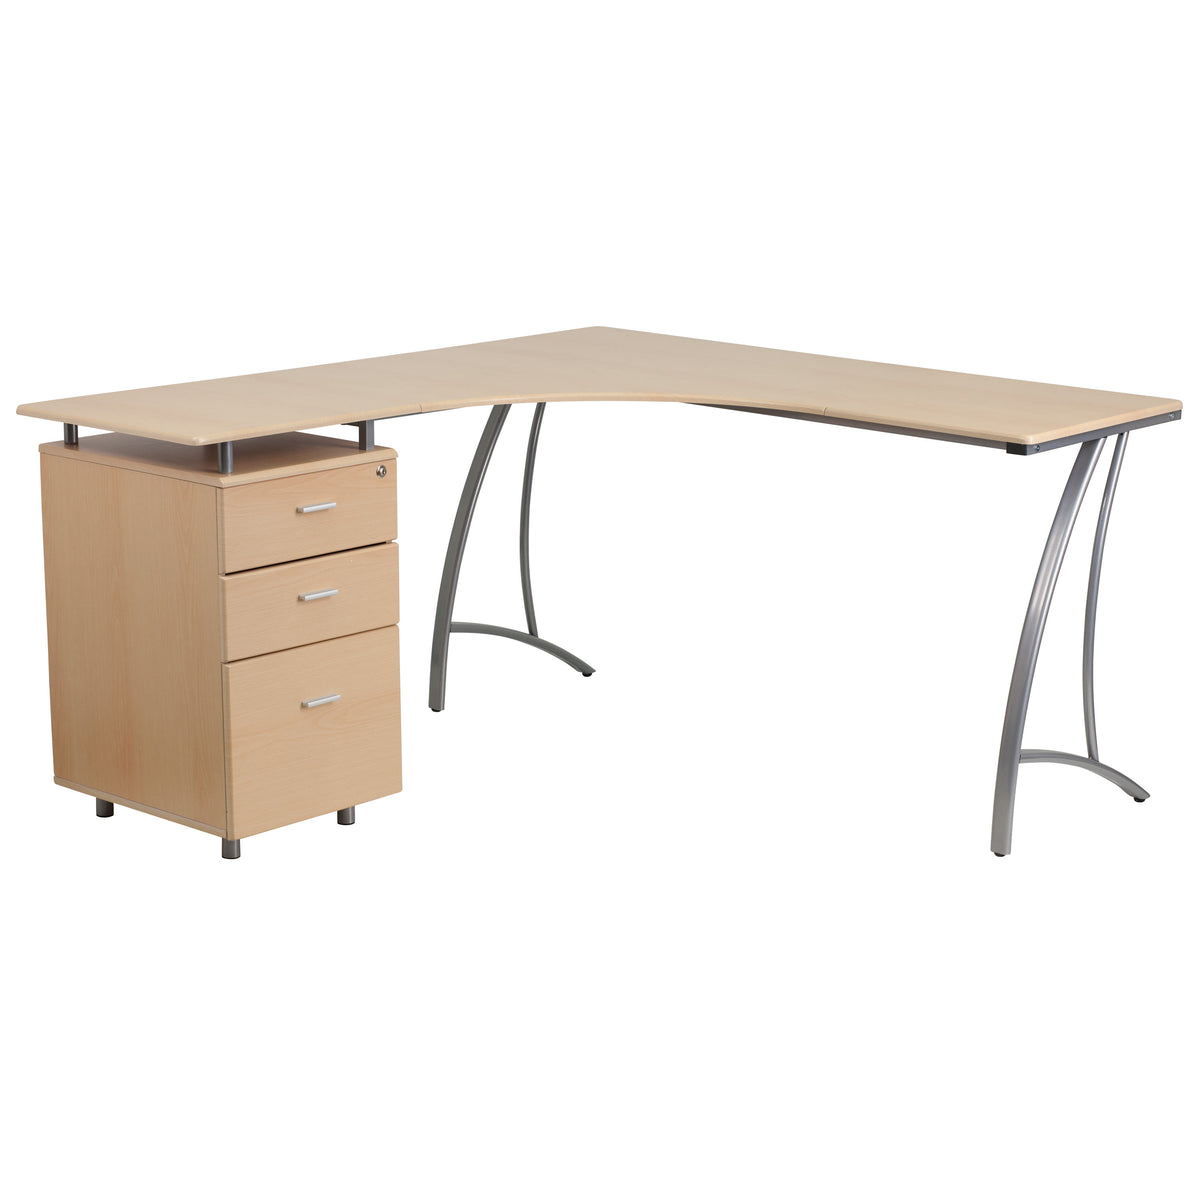 Beech |#| Beech Laminate L-Shape Desk with Three Drawer Pedestal and Locking Drawers